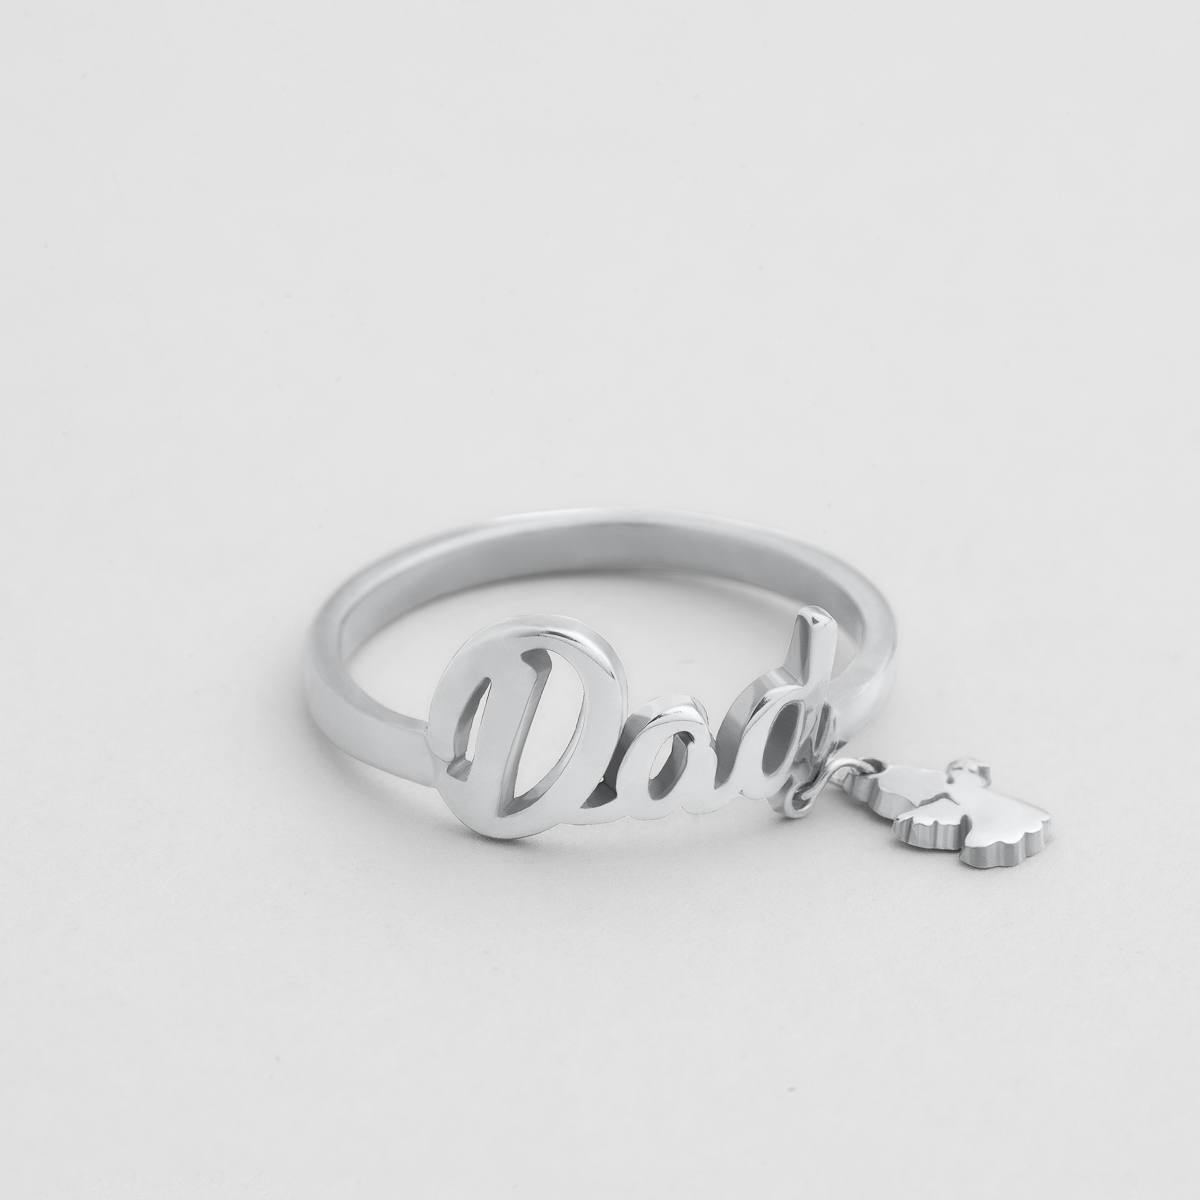 Buy Antiquestreet Personalized Design Silver Plated Non-Precious Metal Dual Name  Ring with Pendant Box for Girls at Amazon.in